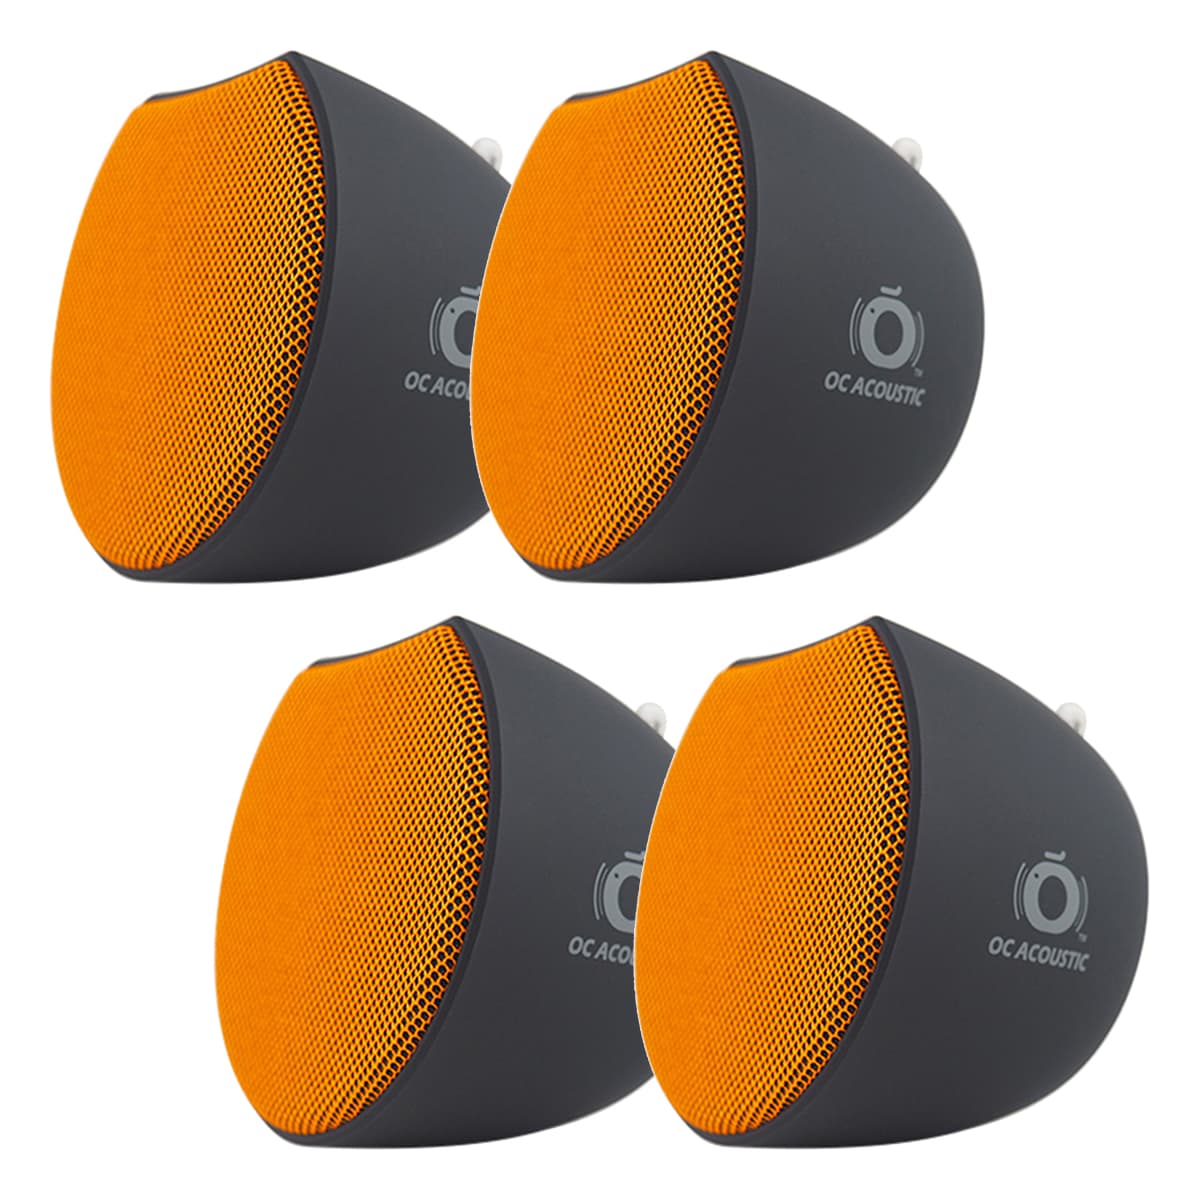 OC Acoustic Newport Plug-in Outlet Speaker with Bluetooth 5.1 and Built-in USB Type-A Charging Port - Set of 4 (Orange/Black)